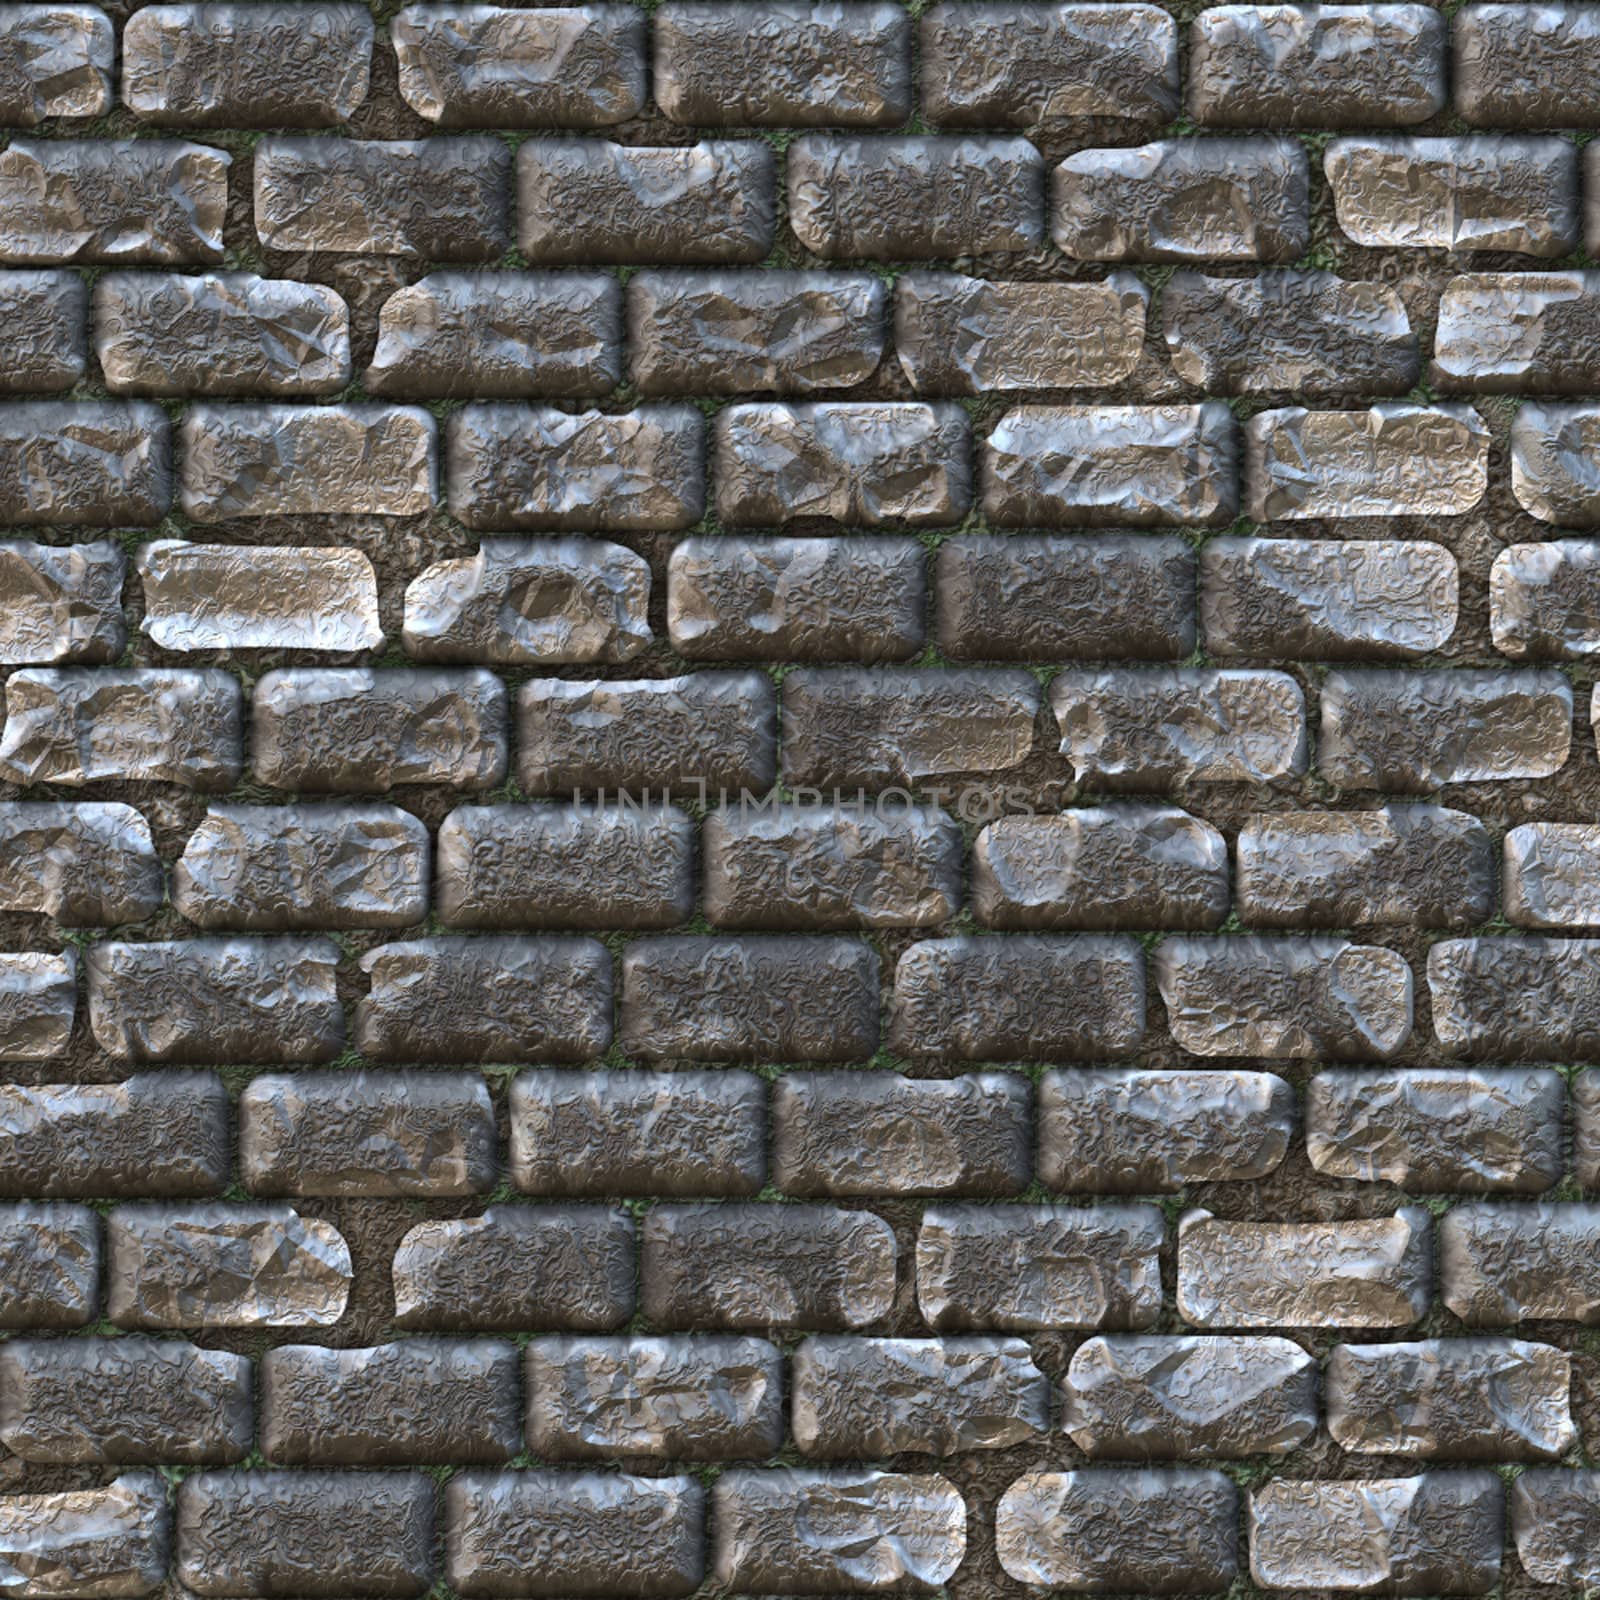 castle wall made up of old gray bricks